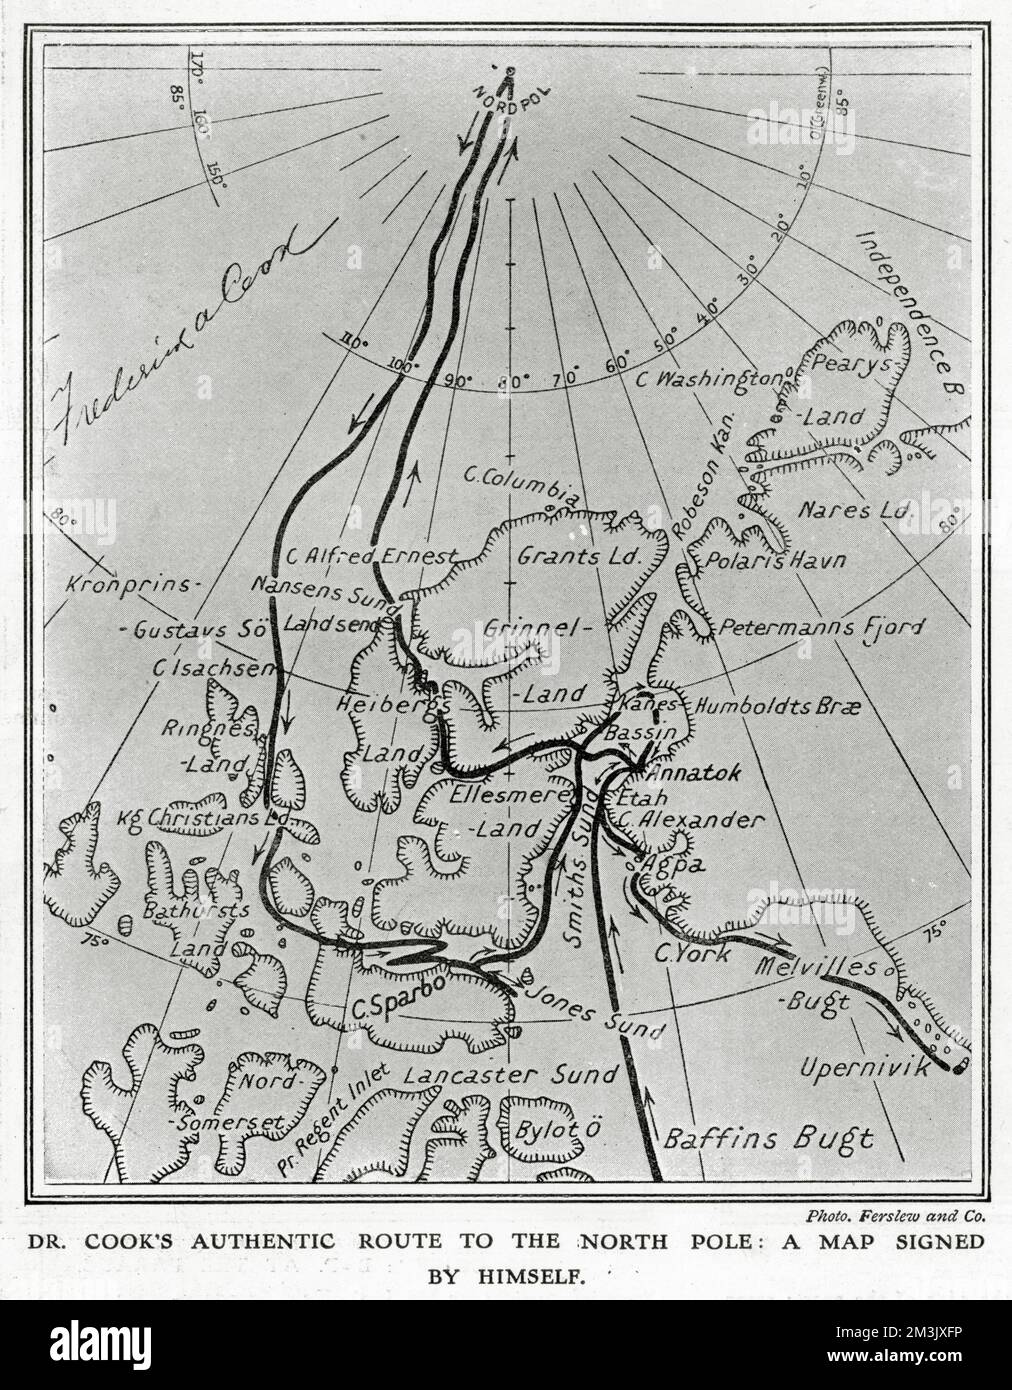 Map showing the route taken by Dr. Frederick A. Cook and his Inuit companions, Ah-welsh and Etukishook, to the North Pole, in 1907 - 1908. The chart has been signed by the Dr. Cook himself, at top left.  A debate has long raged over whether it was Cook or Peary who first reached the North Pole, but it seems that Dr. Cook had a good claim to be first. Stock Photo